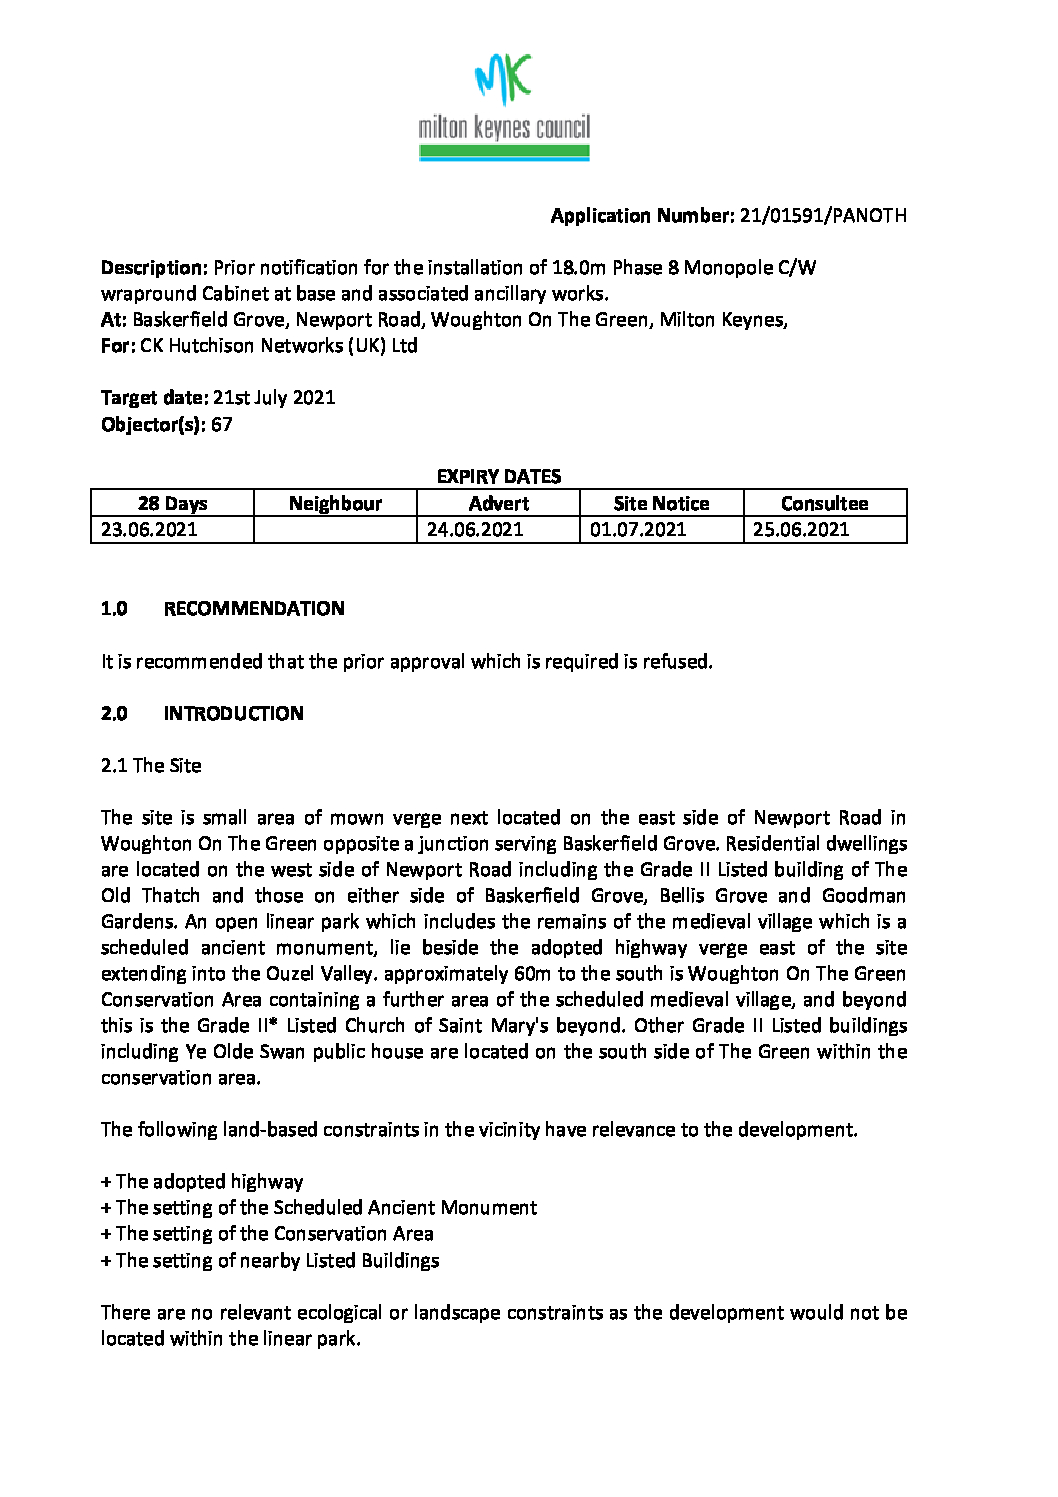 5G Mast Application Delegated Report – Old Woughton Parish Council